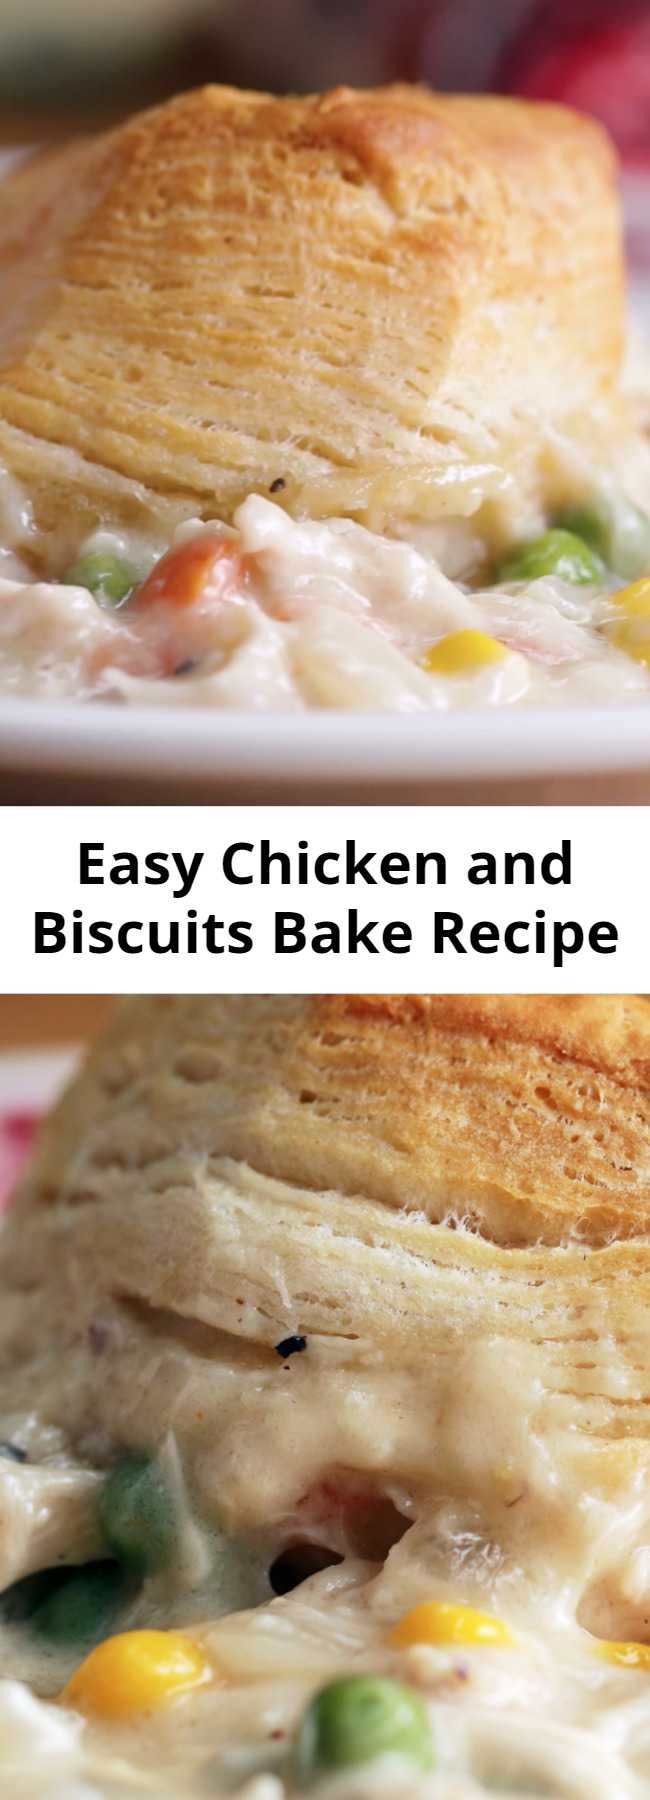 Easy Chicken and Biscuits Bake Recipe